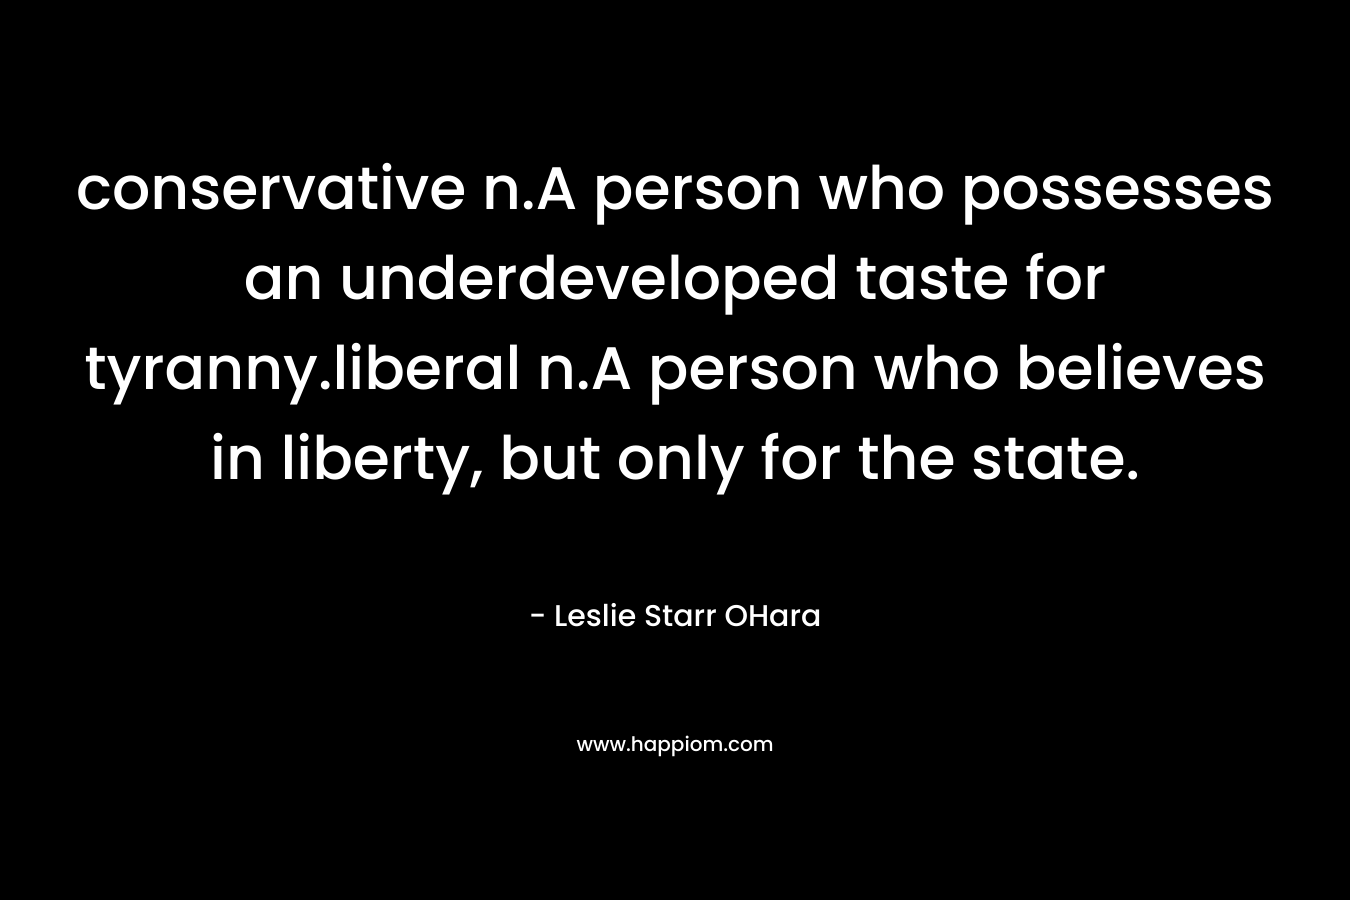 conservative n.A person who possesses an underdeveloped taste for tyranny.liberal n.A person who believes in liberty, but only for the state.